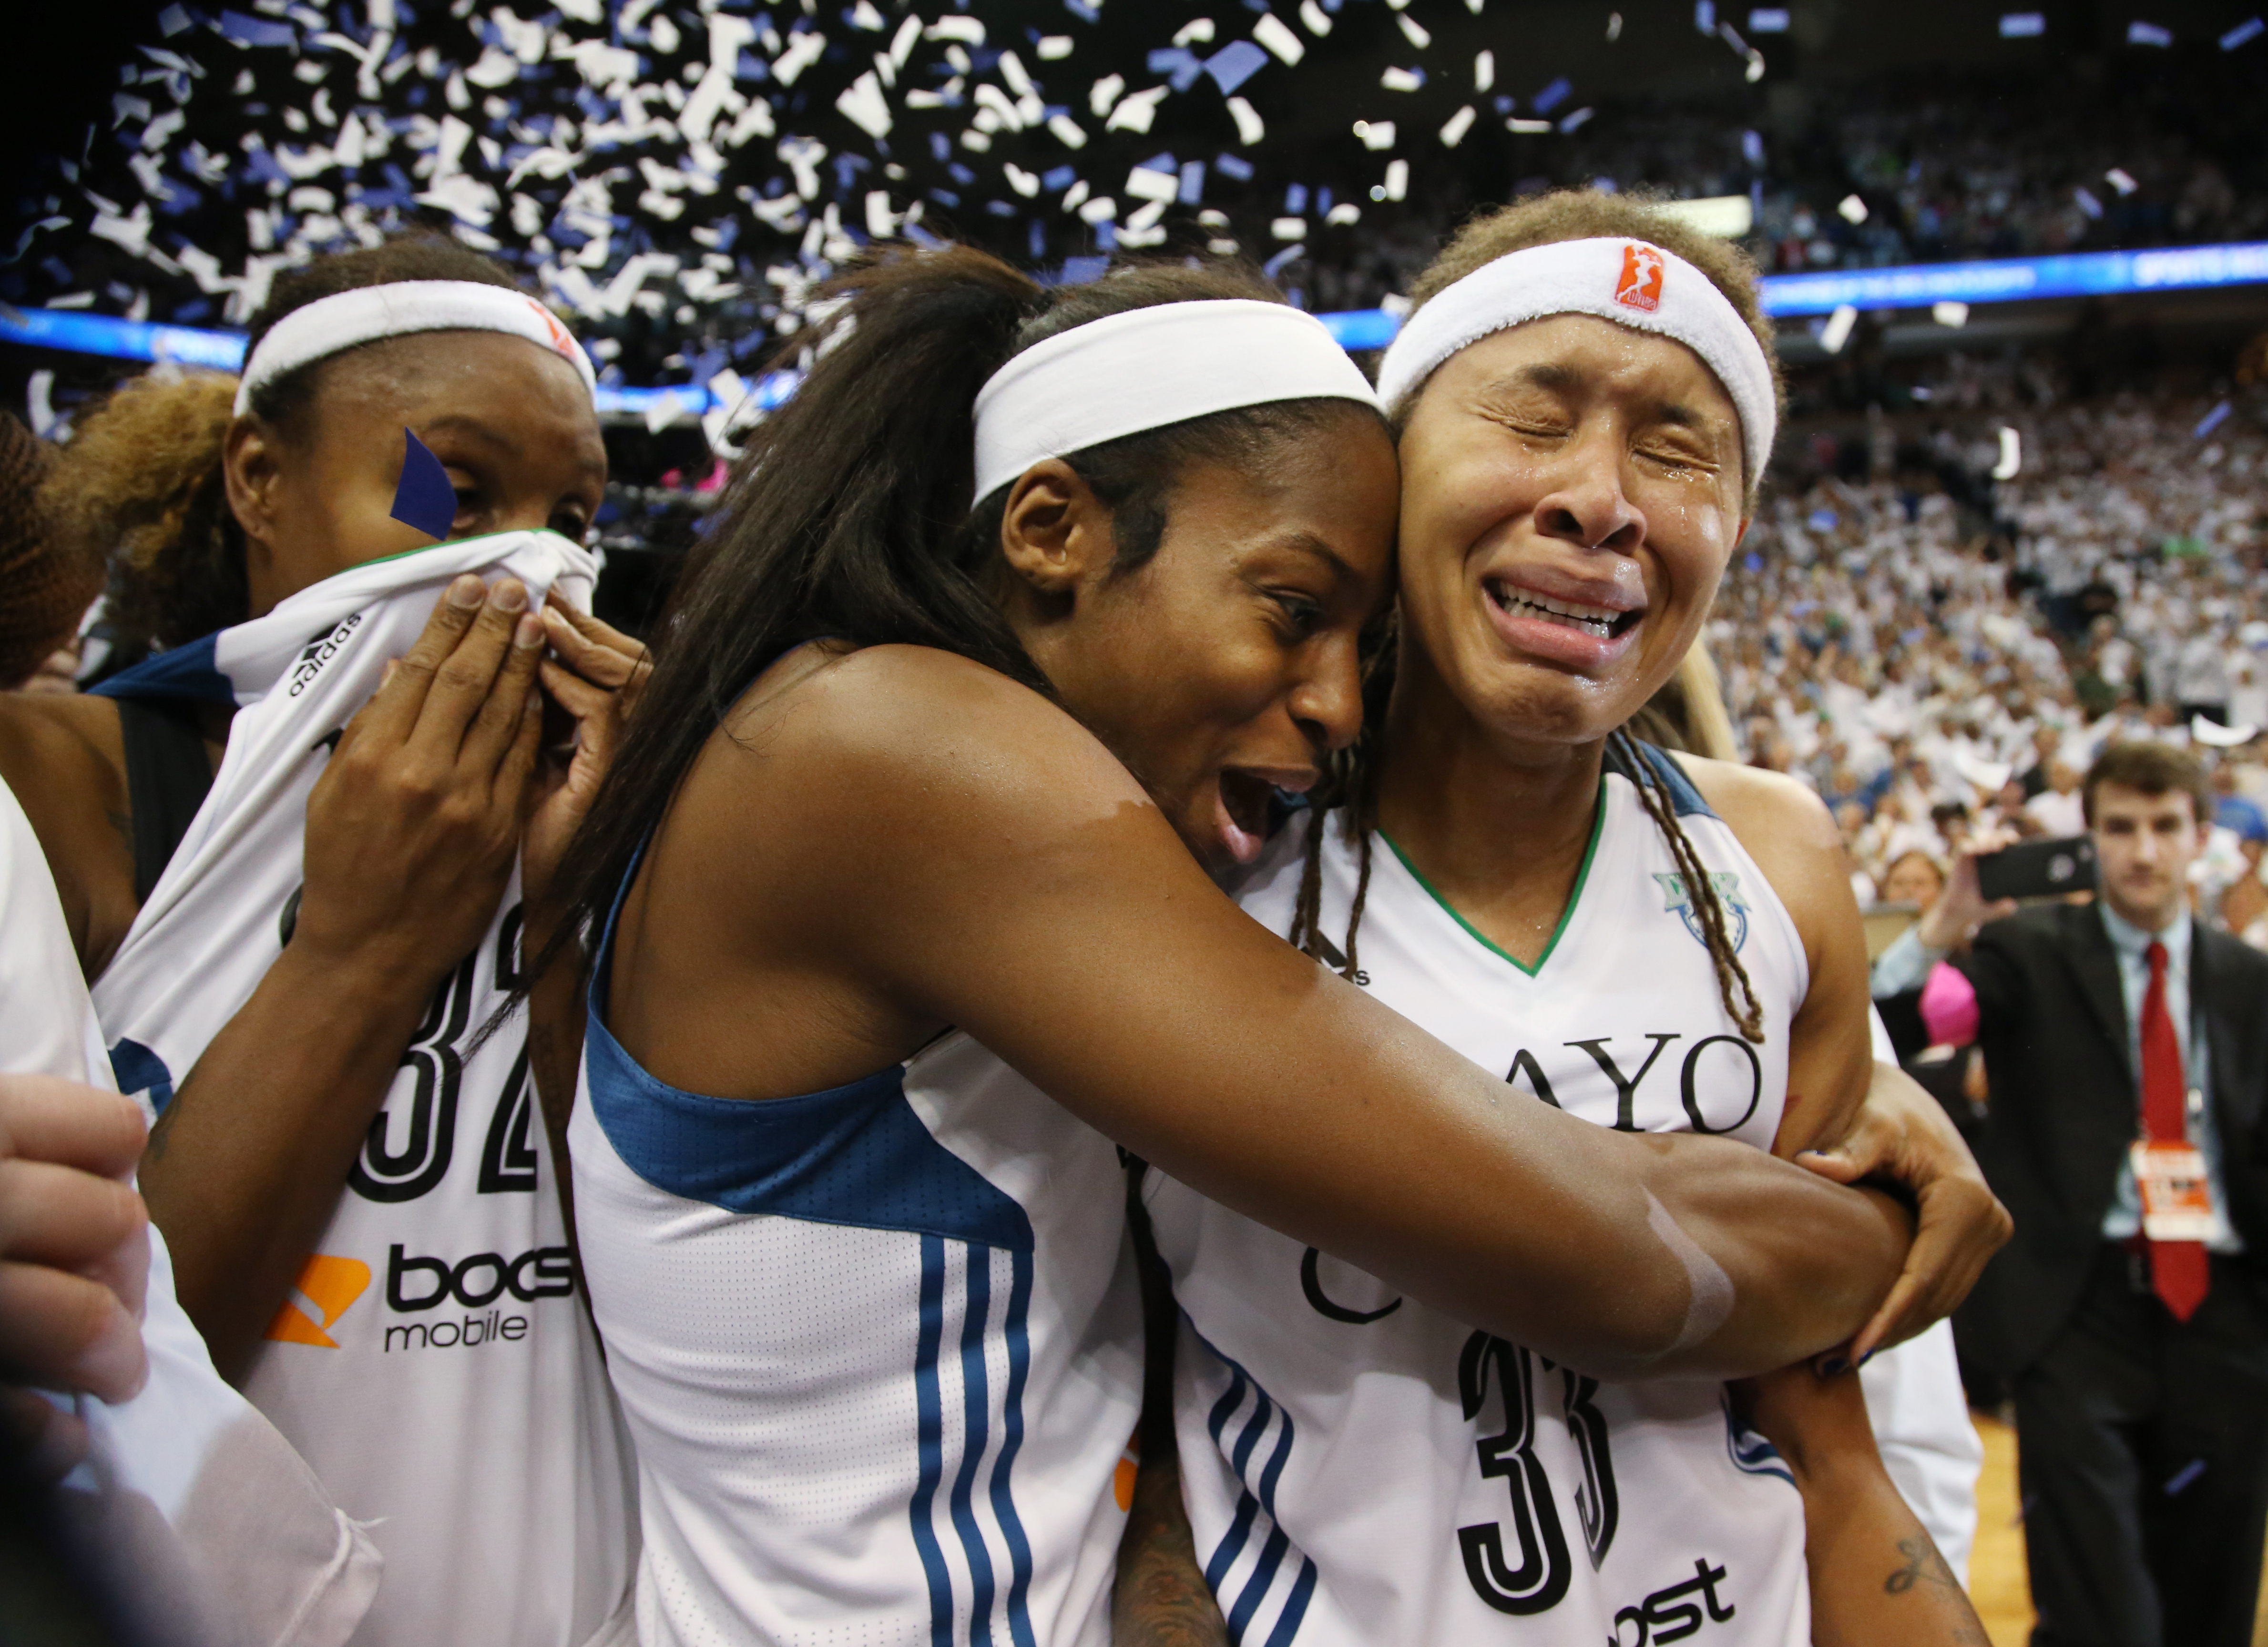 Minnesota Lynx guard Seimone Augustus (33), right, and Minnesota Lynx forward Devereaux Peters (14) celebrate winning the WNBA title.   ] (KYNDELL HARKNESS/STAR TRIBUNE) kyndell.harkness@startribune.com  Game 5 of the WNBA finals Lynx vs Indiana at the Target Center in Minneapolis, Min., Wednesday October 14,  2015. ORG XMIT: MIN1510142135070441